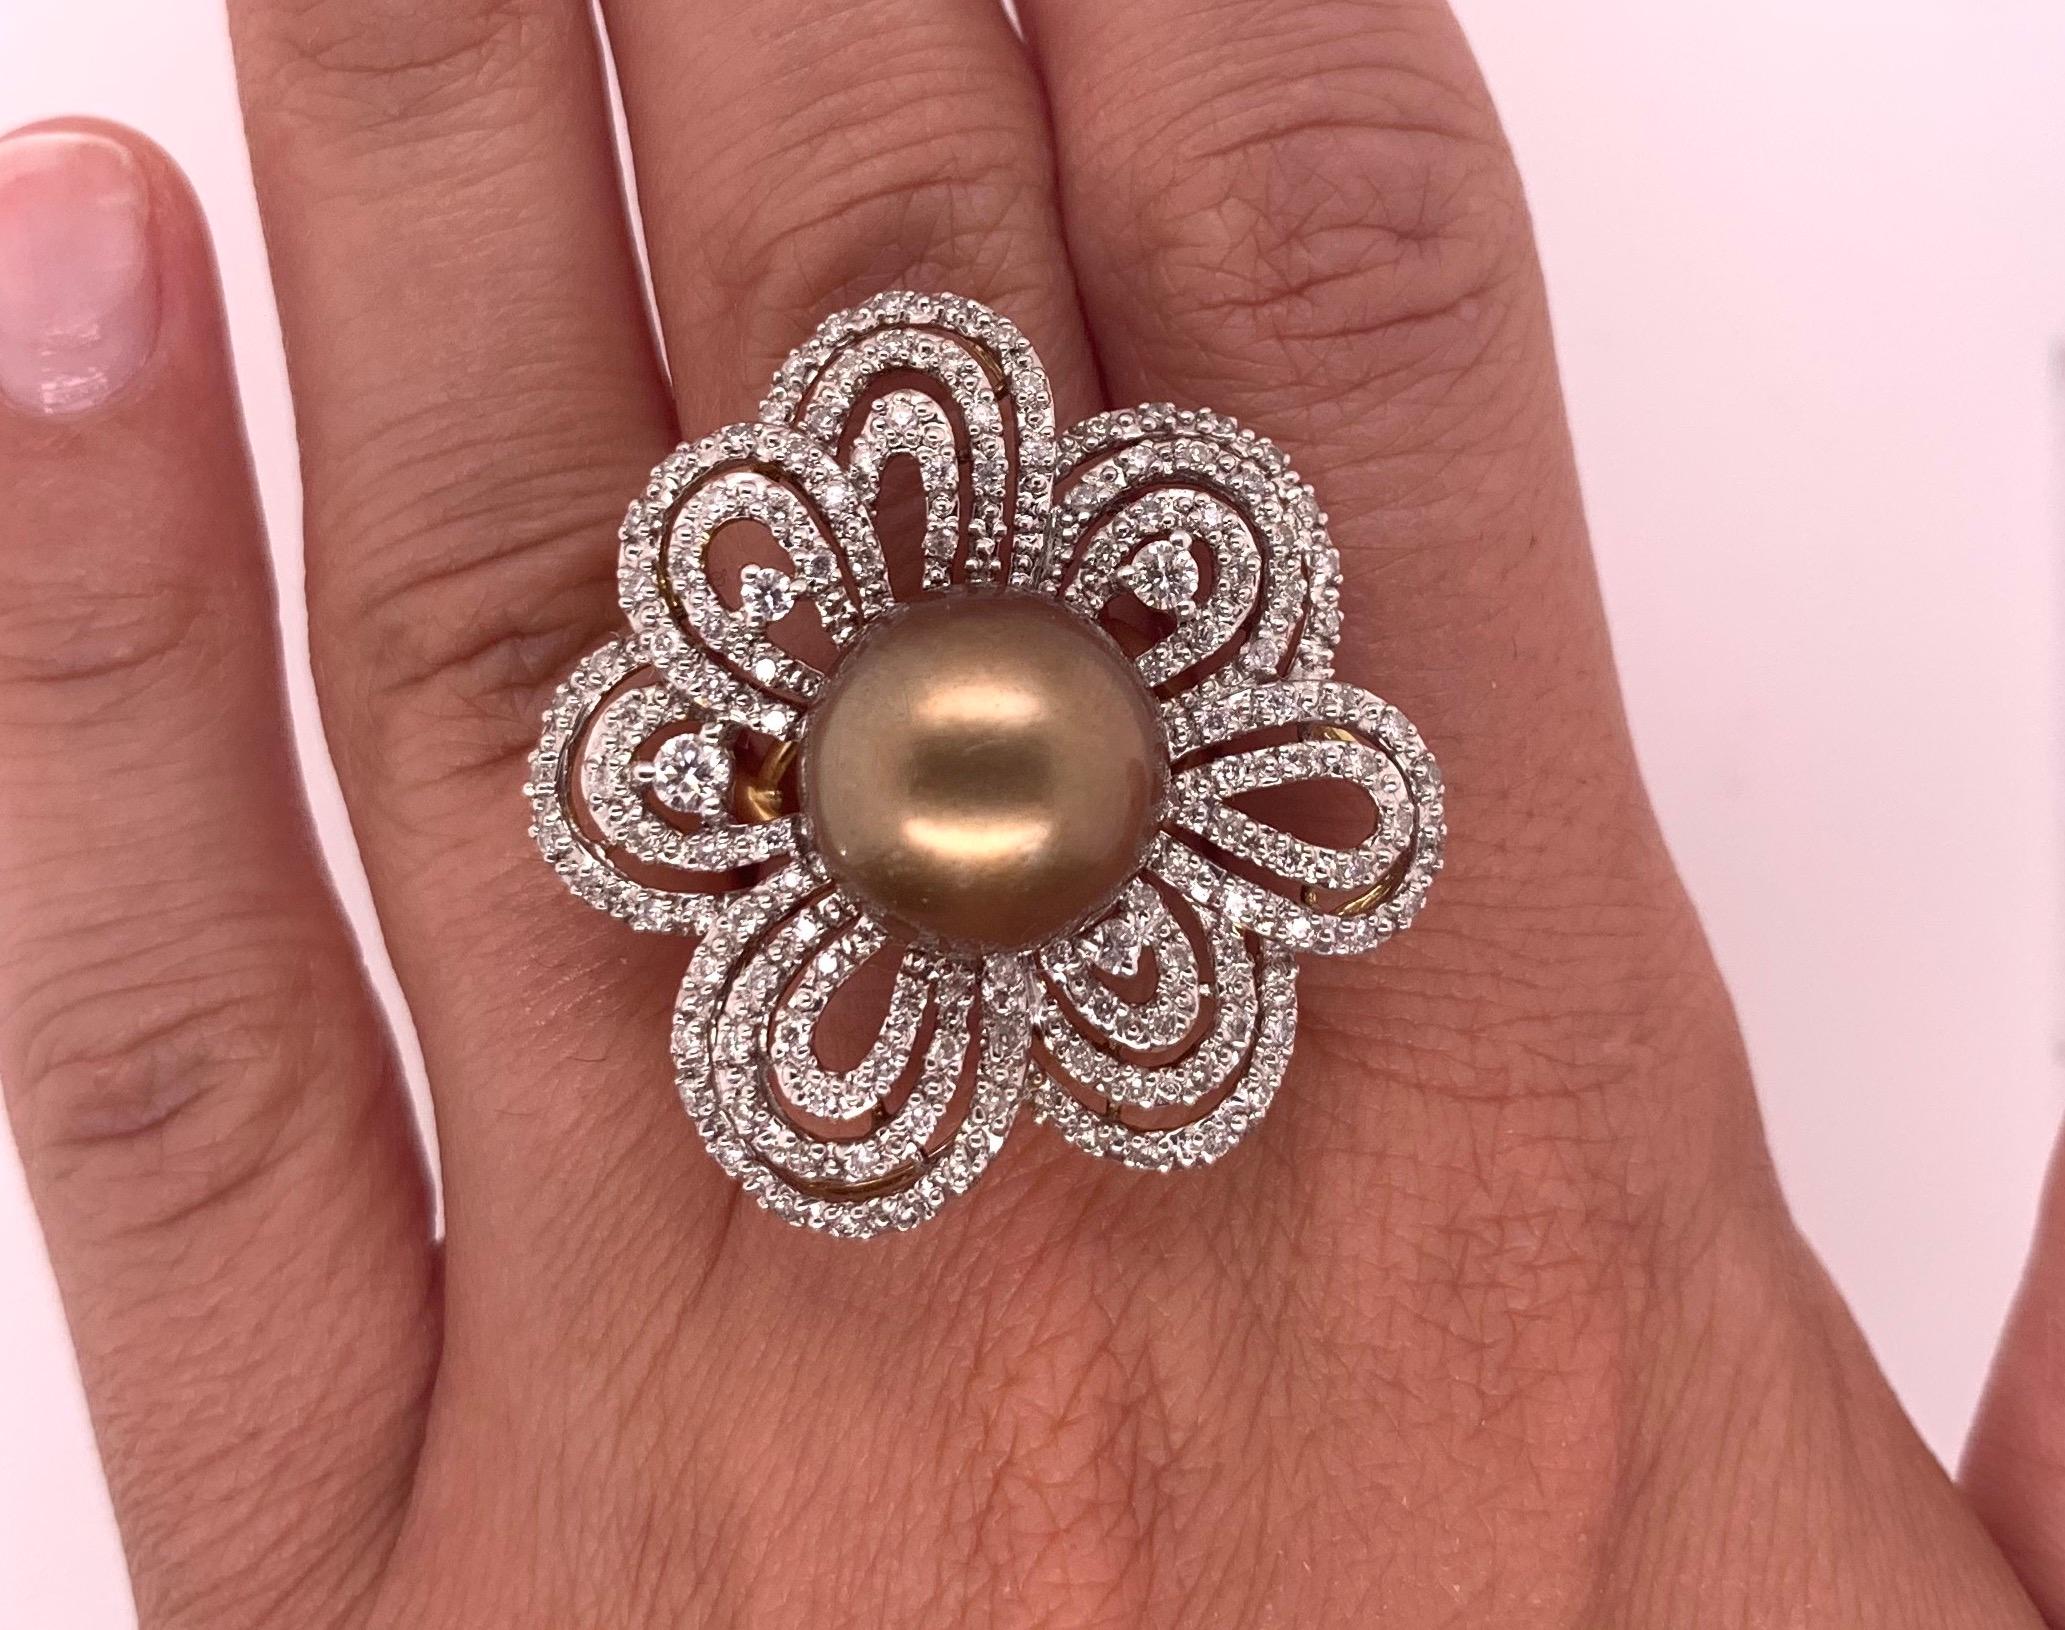 Material: 18K Two Tone Gold
Gemstone Details: 1 Round Pearl - 12.7mm
Diamond Details: Brilliant Round White Diamonds at 0.98 Carats. VS-SI Clarity / H-I Color. 

Ring Size: 6.75. Alberto offers complimentary sizing on all rings.

Fine one-of-a kind